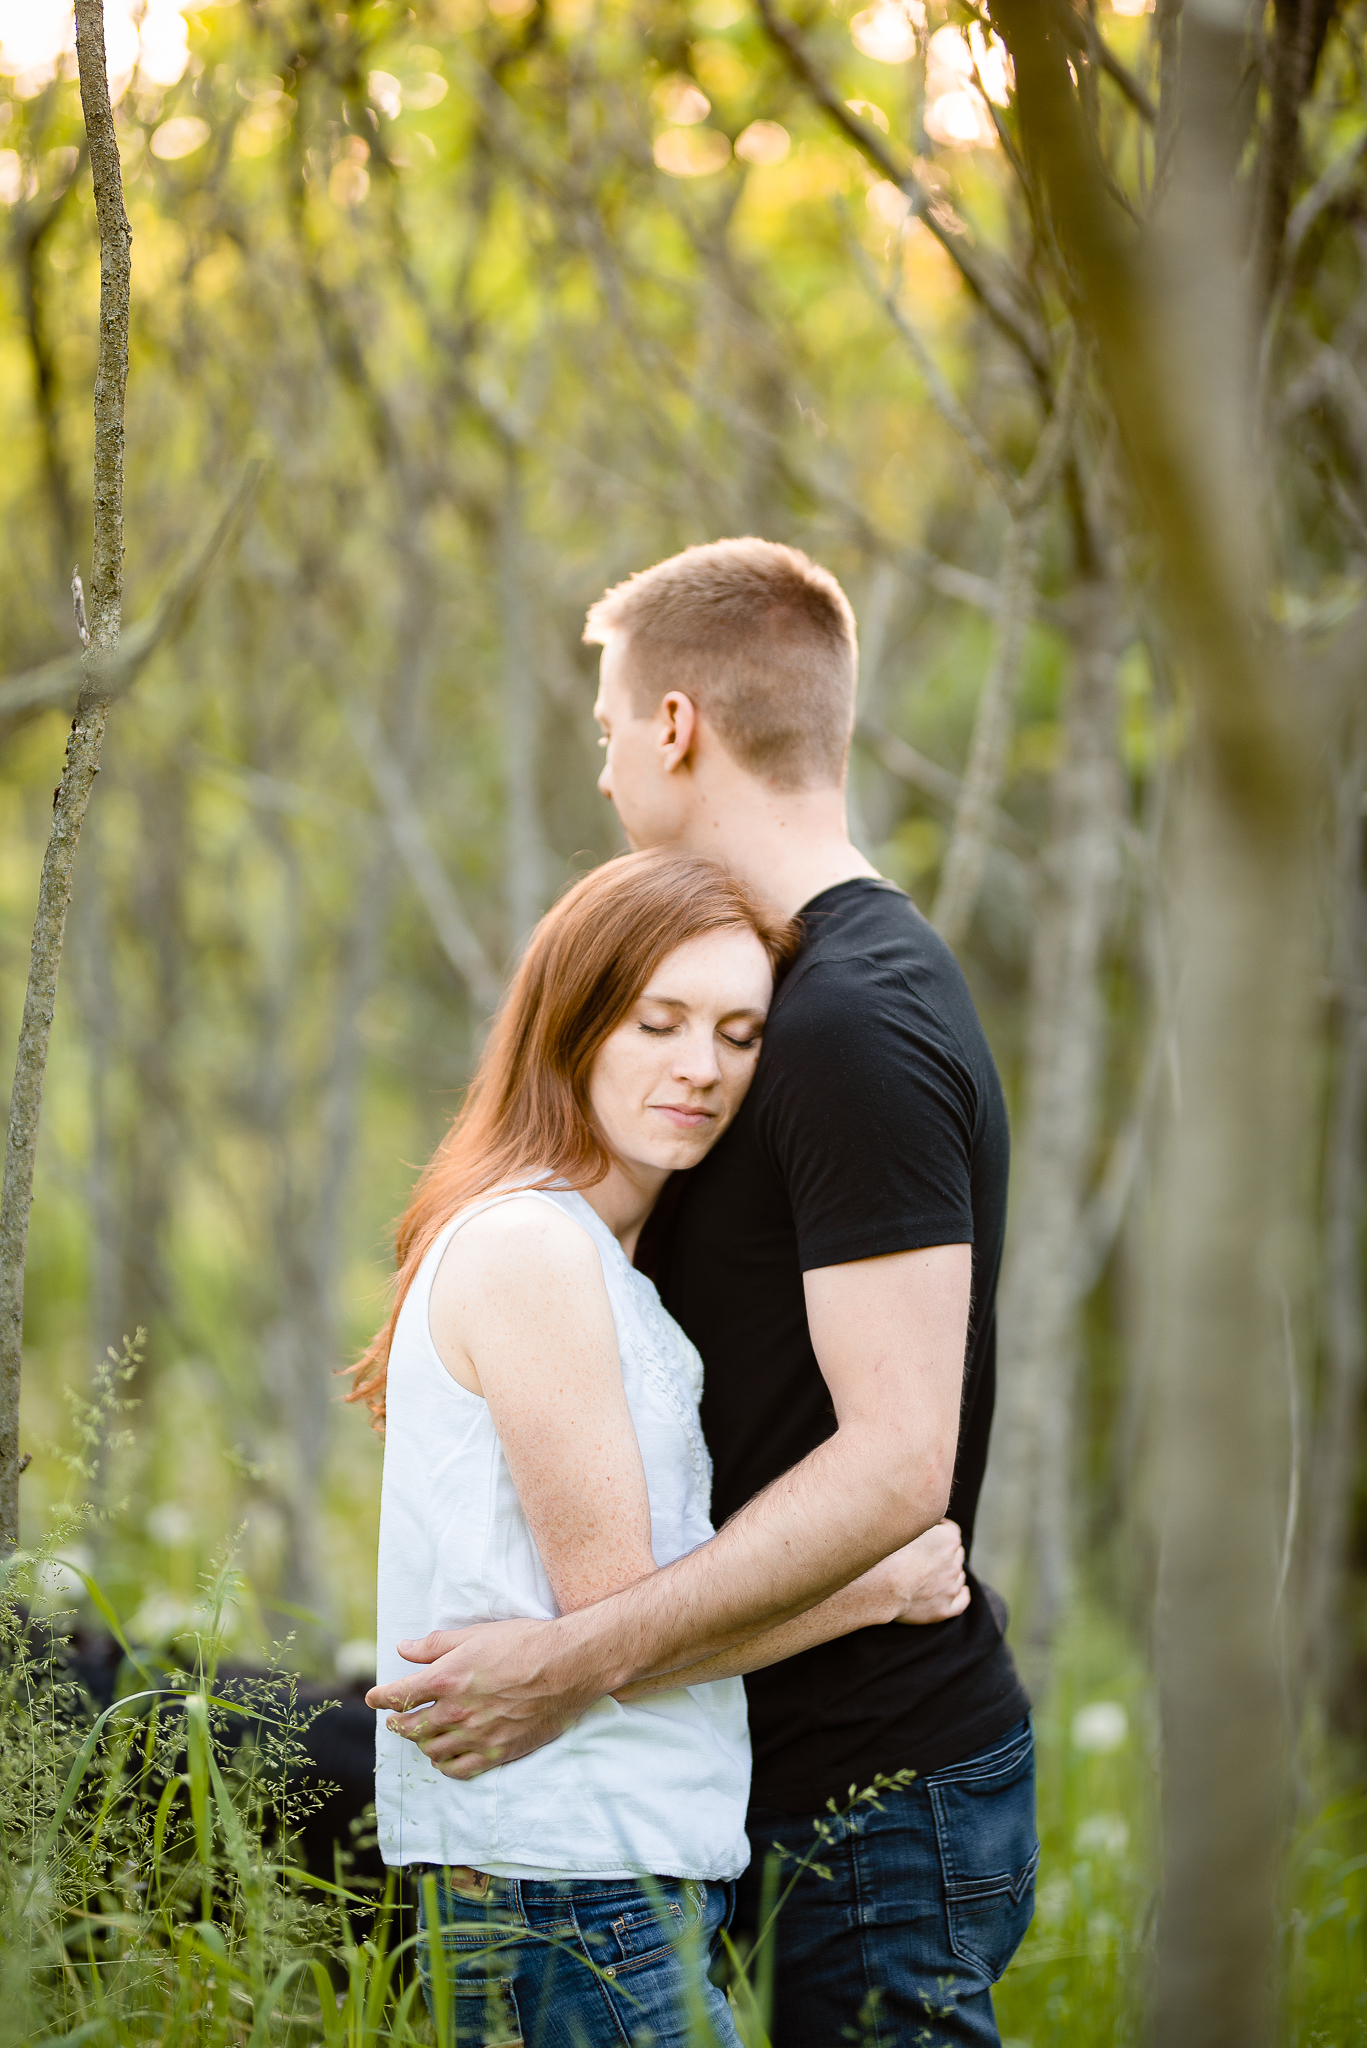 Couples299NaomiLuciennePhotography062019-Edit.jpg